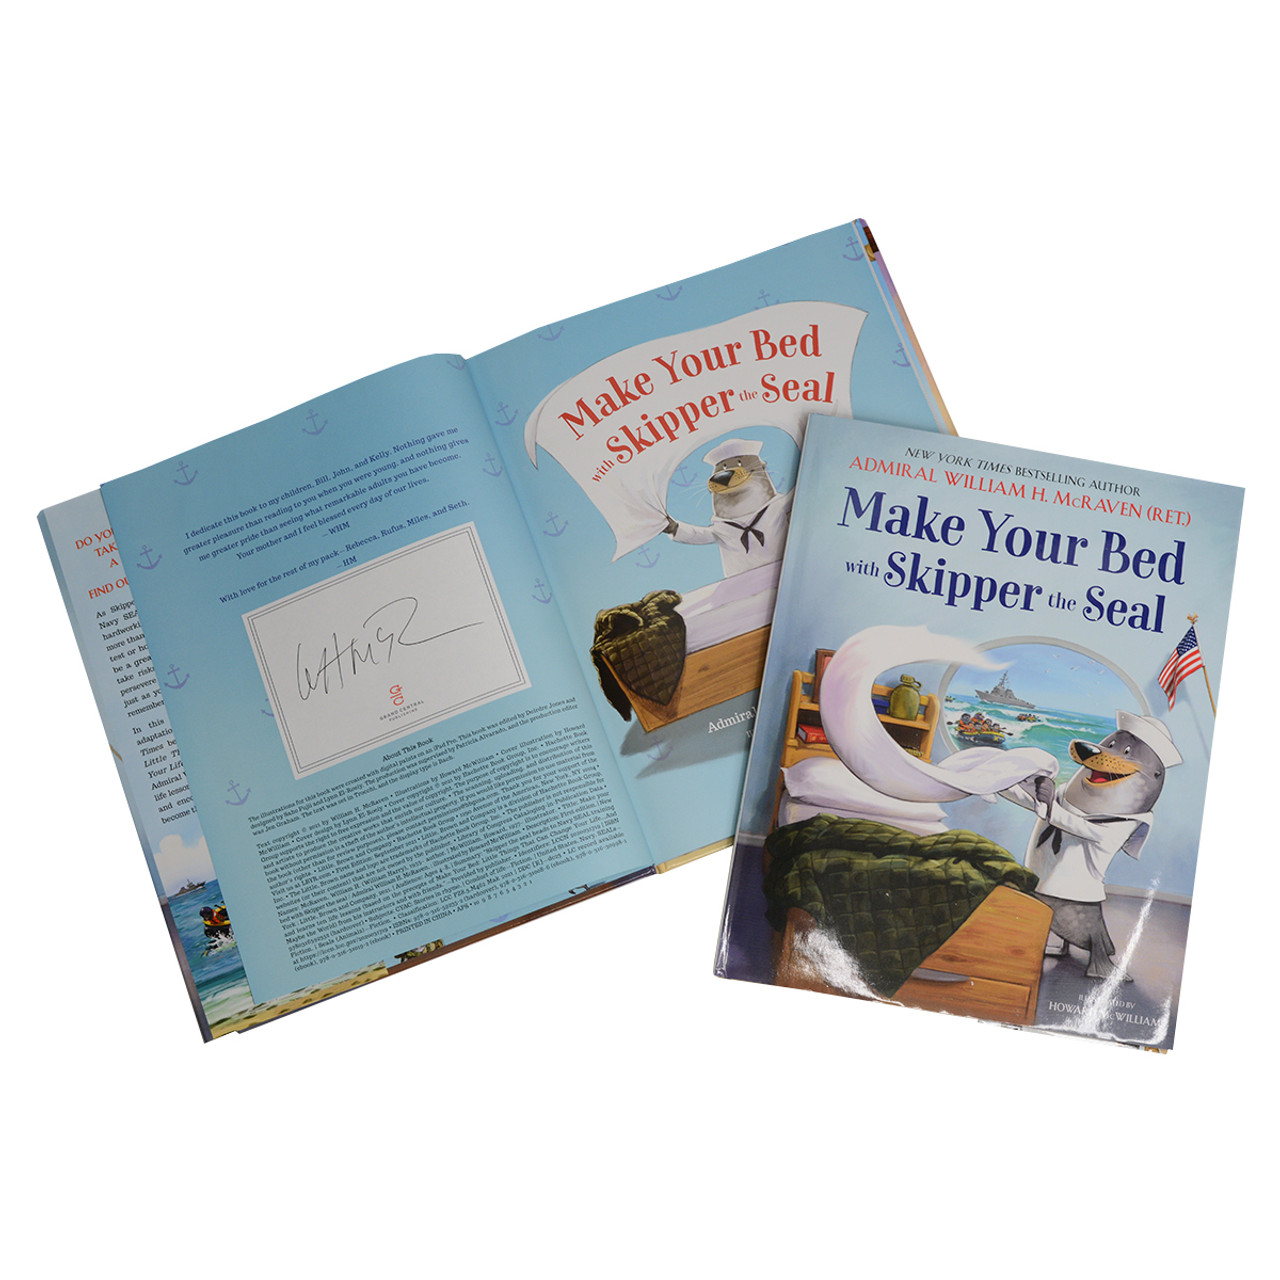 Make Your Bed with Skipper the Seal-Book (Bookplate Signed by Admiral  McRaven) (SKIPPERSEALBOOK) - Sue Patrick